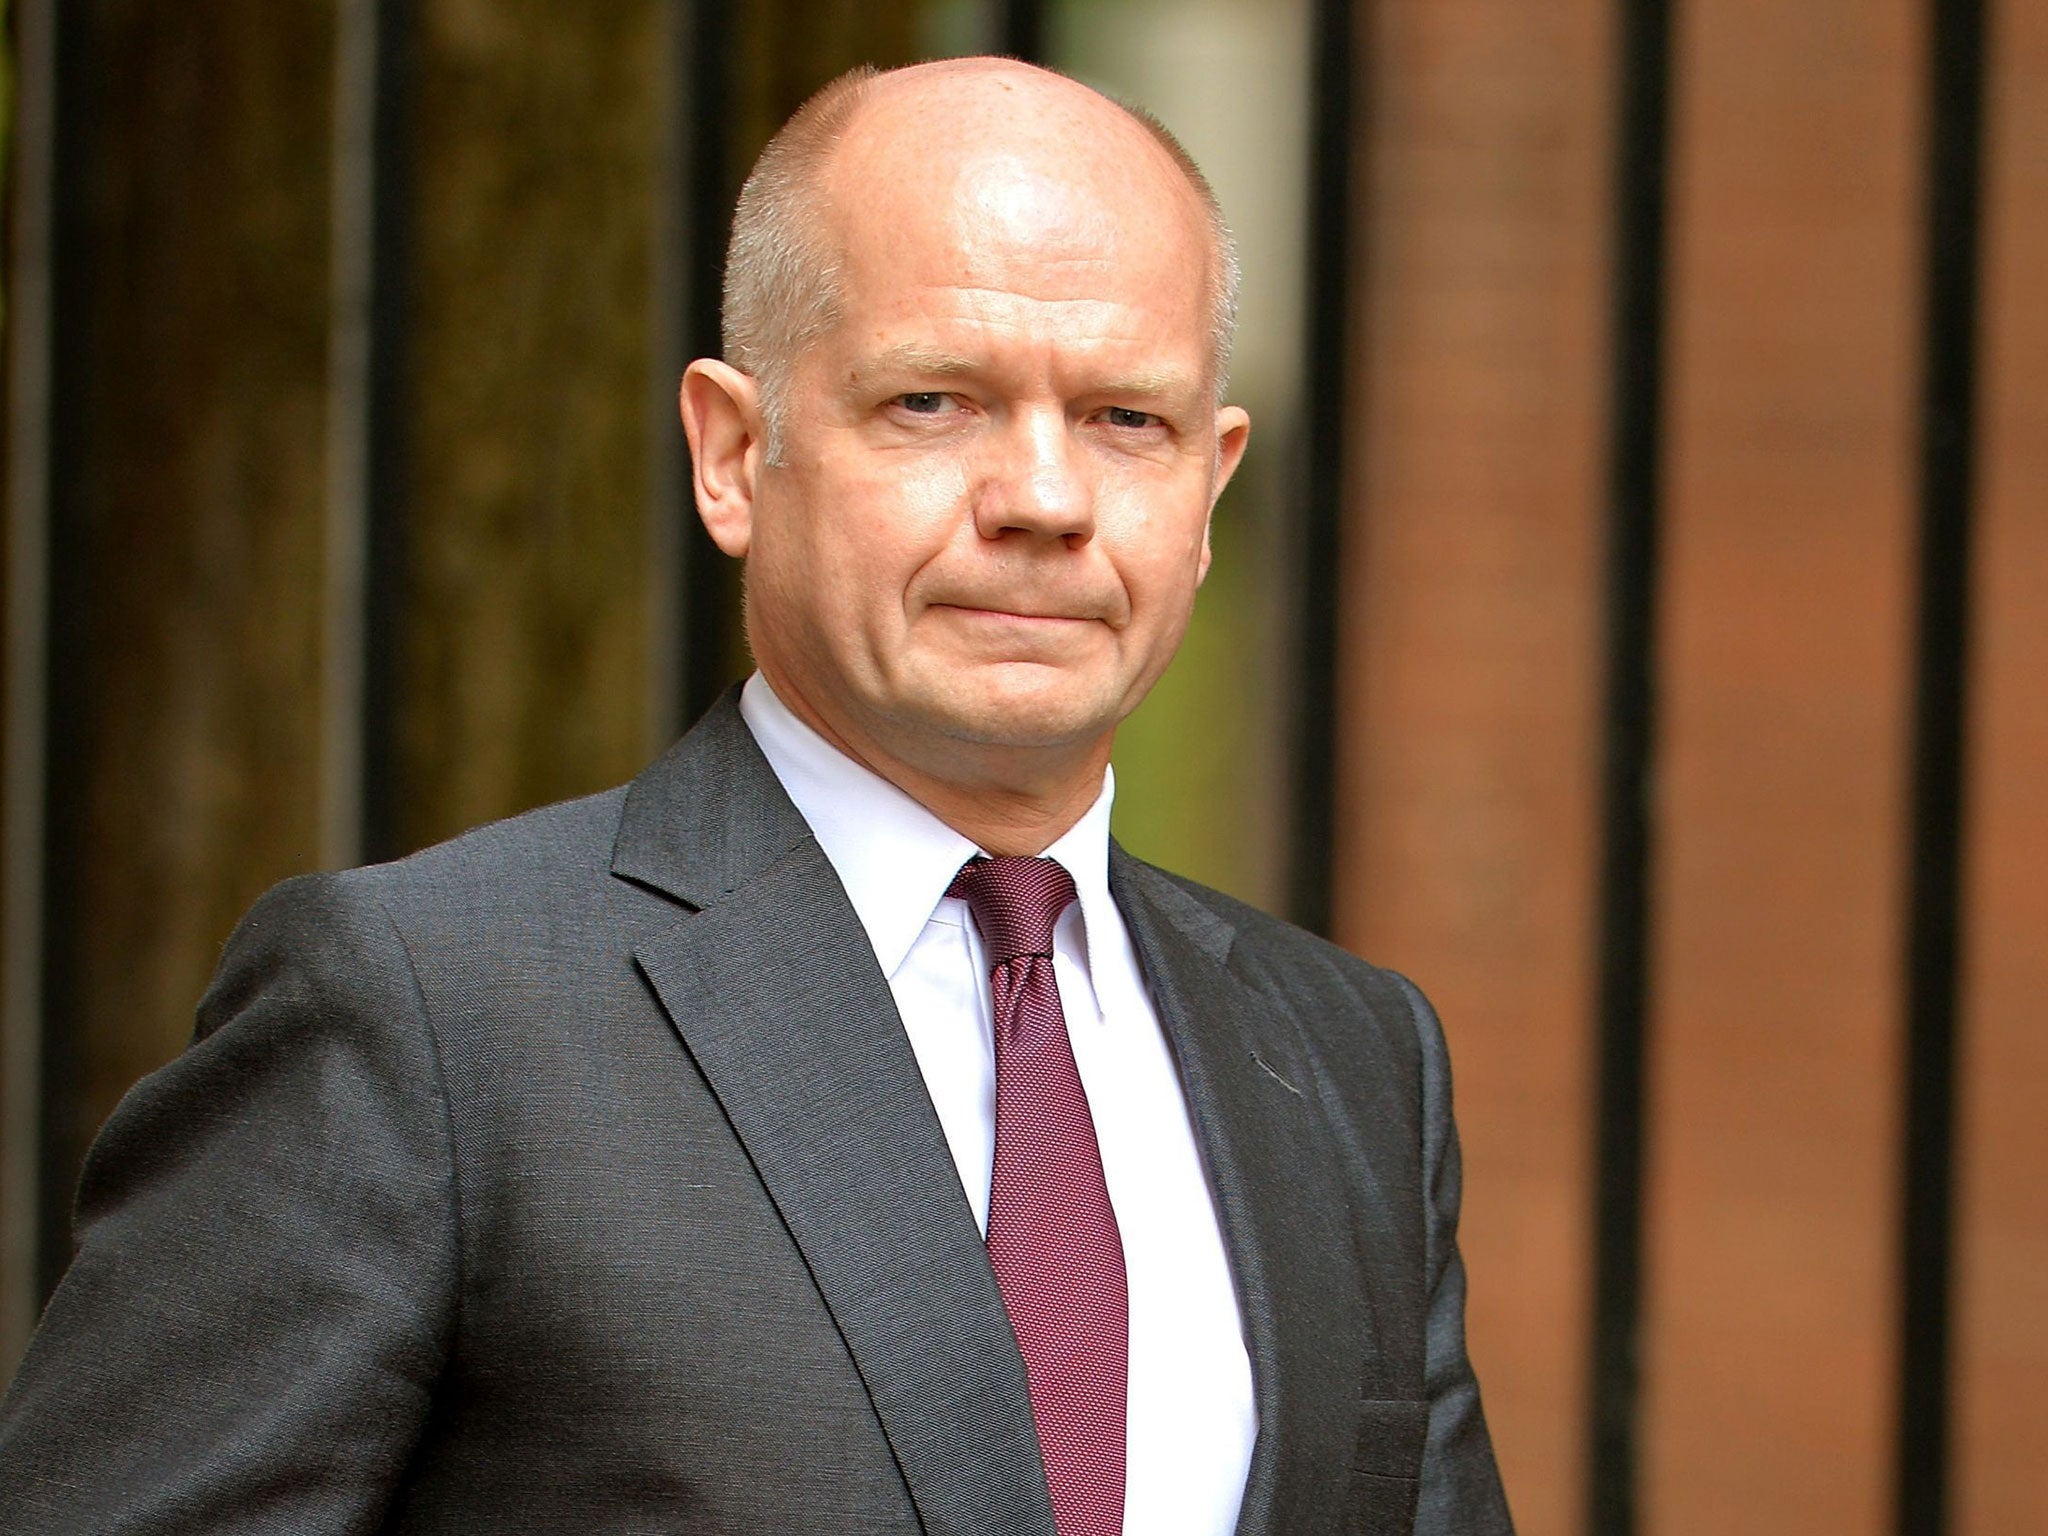 Leader of the Commons William Hague (file picture) was today due to unveil plans which would see English MPs be able to decide on whether a Bill or parts of a Bill which relate only to England should proceed, before going to a final vote of all MPs in the